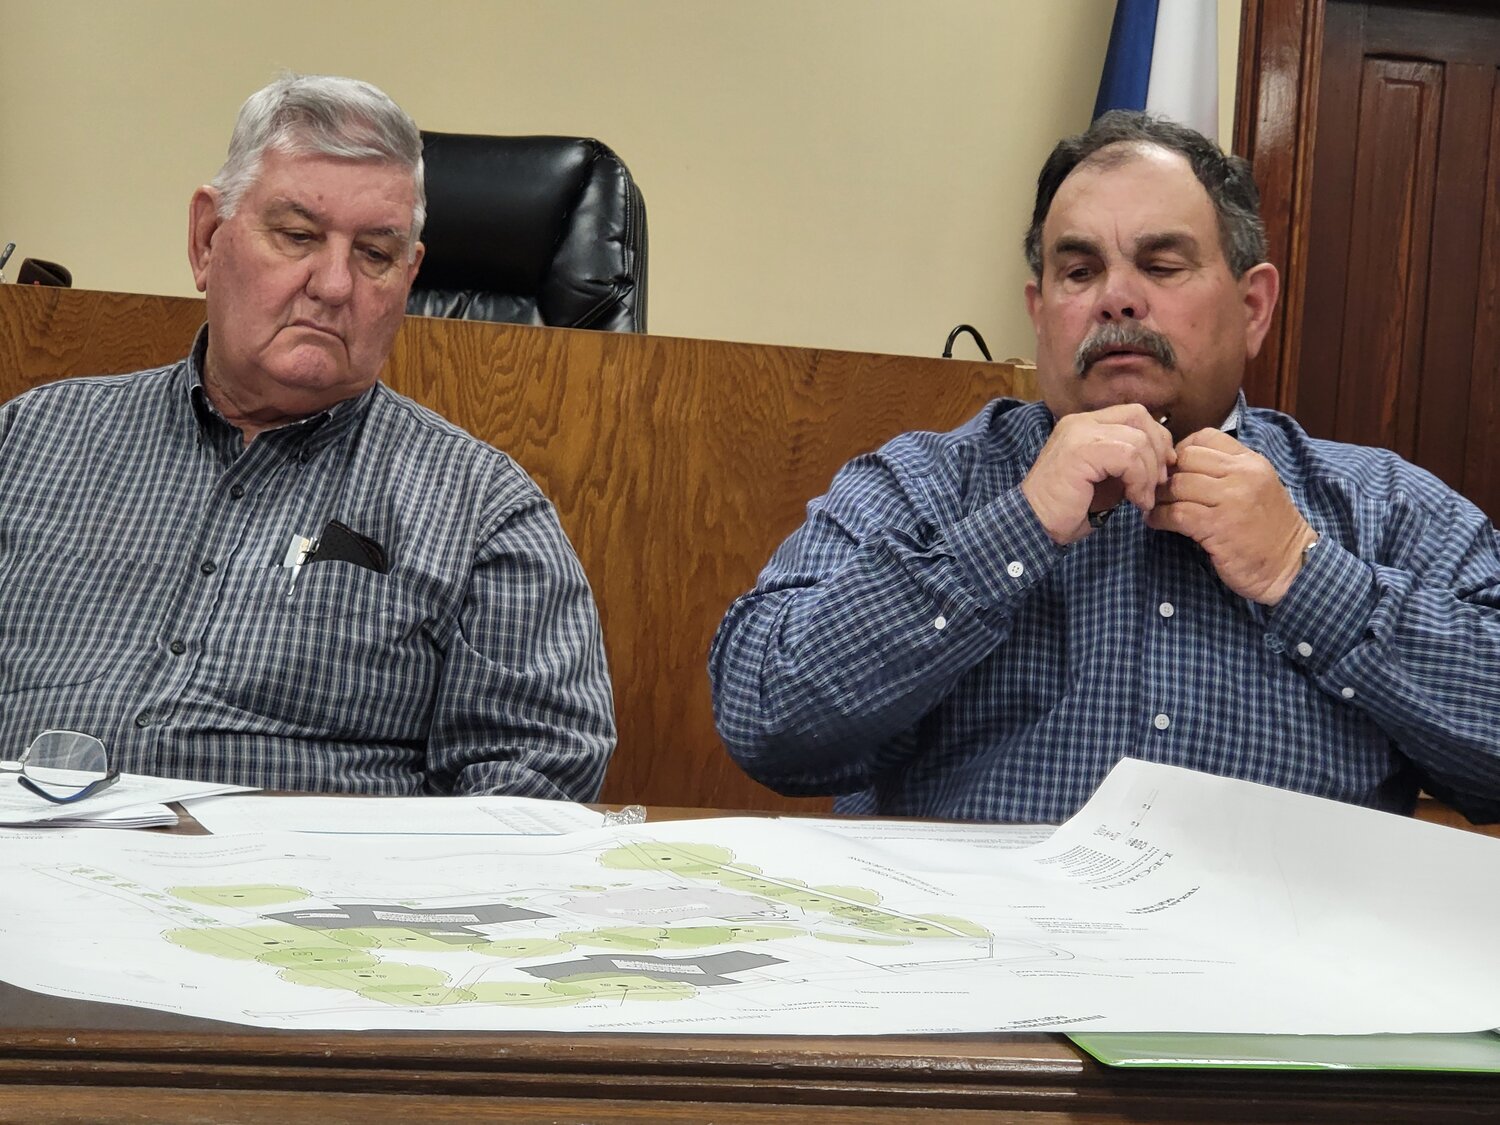 Gonzales County Precinct 2 Commissioner Donnie Brzozowski, left, and Precinct 3 Commissioner Kevin La Fleur study proposed changes to the Gonzales County Courthouse. The county has applied for a $10 million restoration grant for the Courthouse.